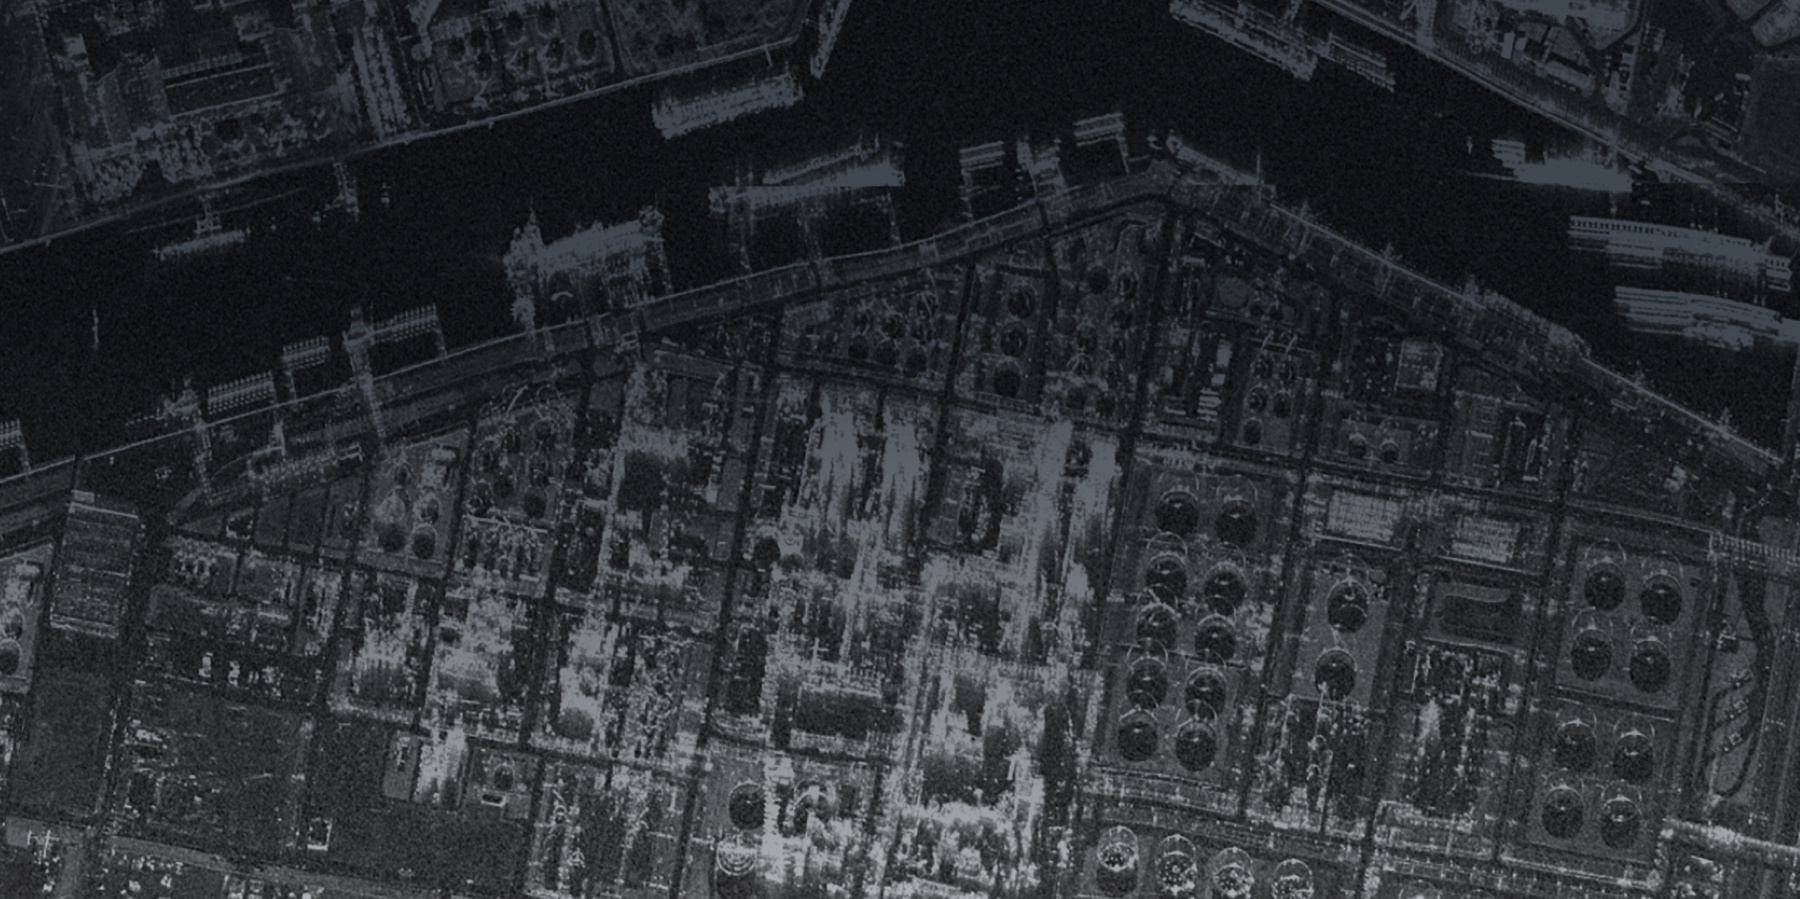 Black and white satellite image of a dock